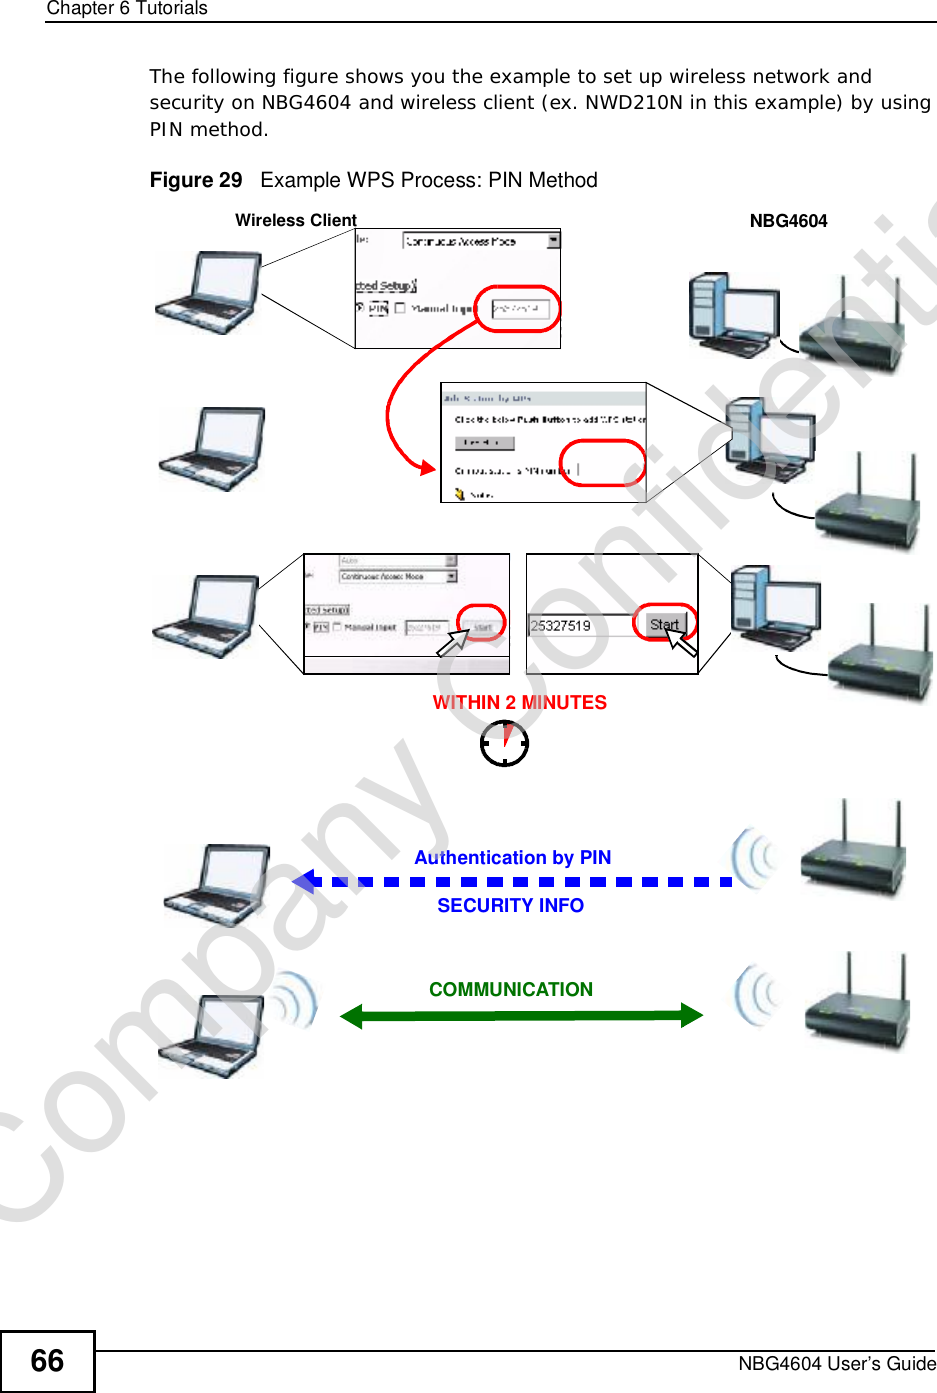 Chapter 6TutorialsNBG4604 User’s Guide66The following figure shows you the example to set up wireless network and security on NBG4604 and wireless client (ex. NWD210N in this example) by using PIN method. Figure 29   Example WPS Process: PIN MethodAuthentication by PINSECURITY INFOWITHIN 2 MINUTESWireless Client NBG4604COMMUNICATIONCompany Confidential